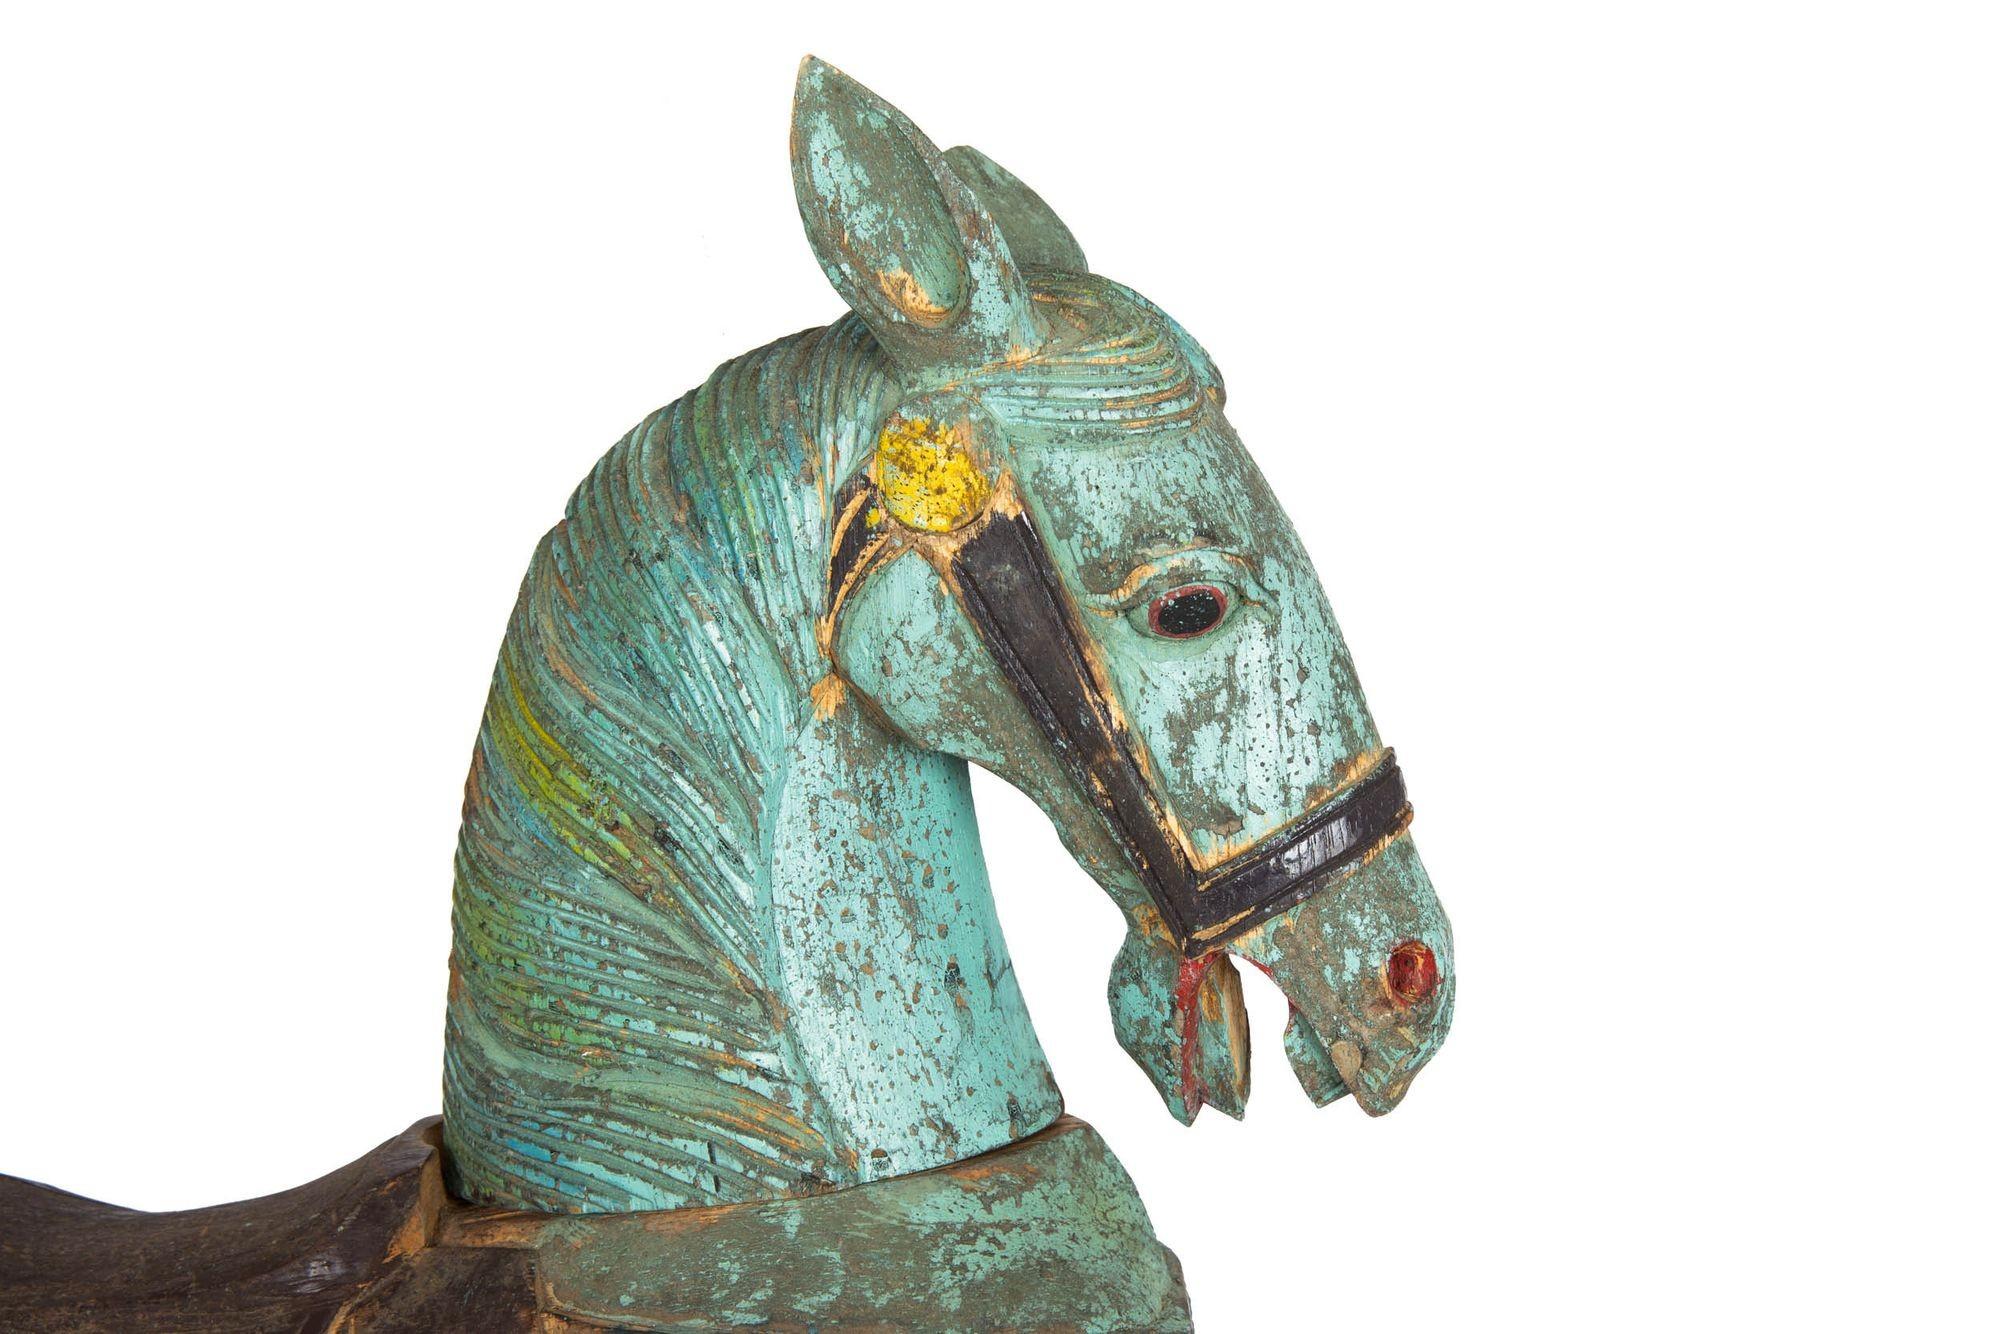 Wood Folk Art Beautifully Hand Carved and Painted Horse Sculpture, United States